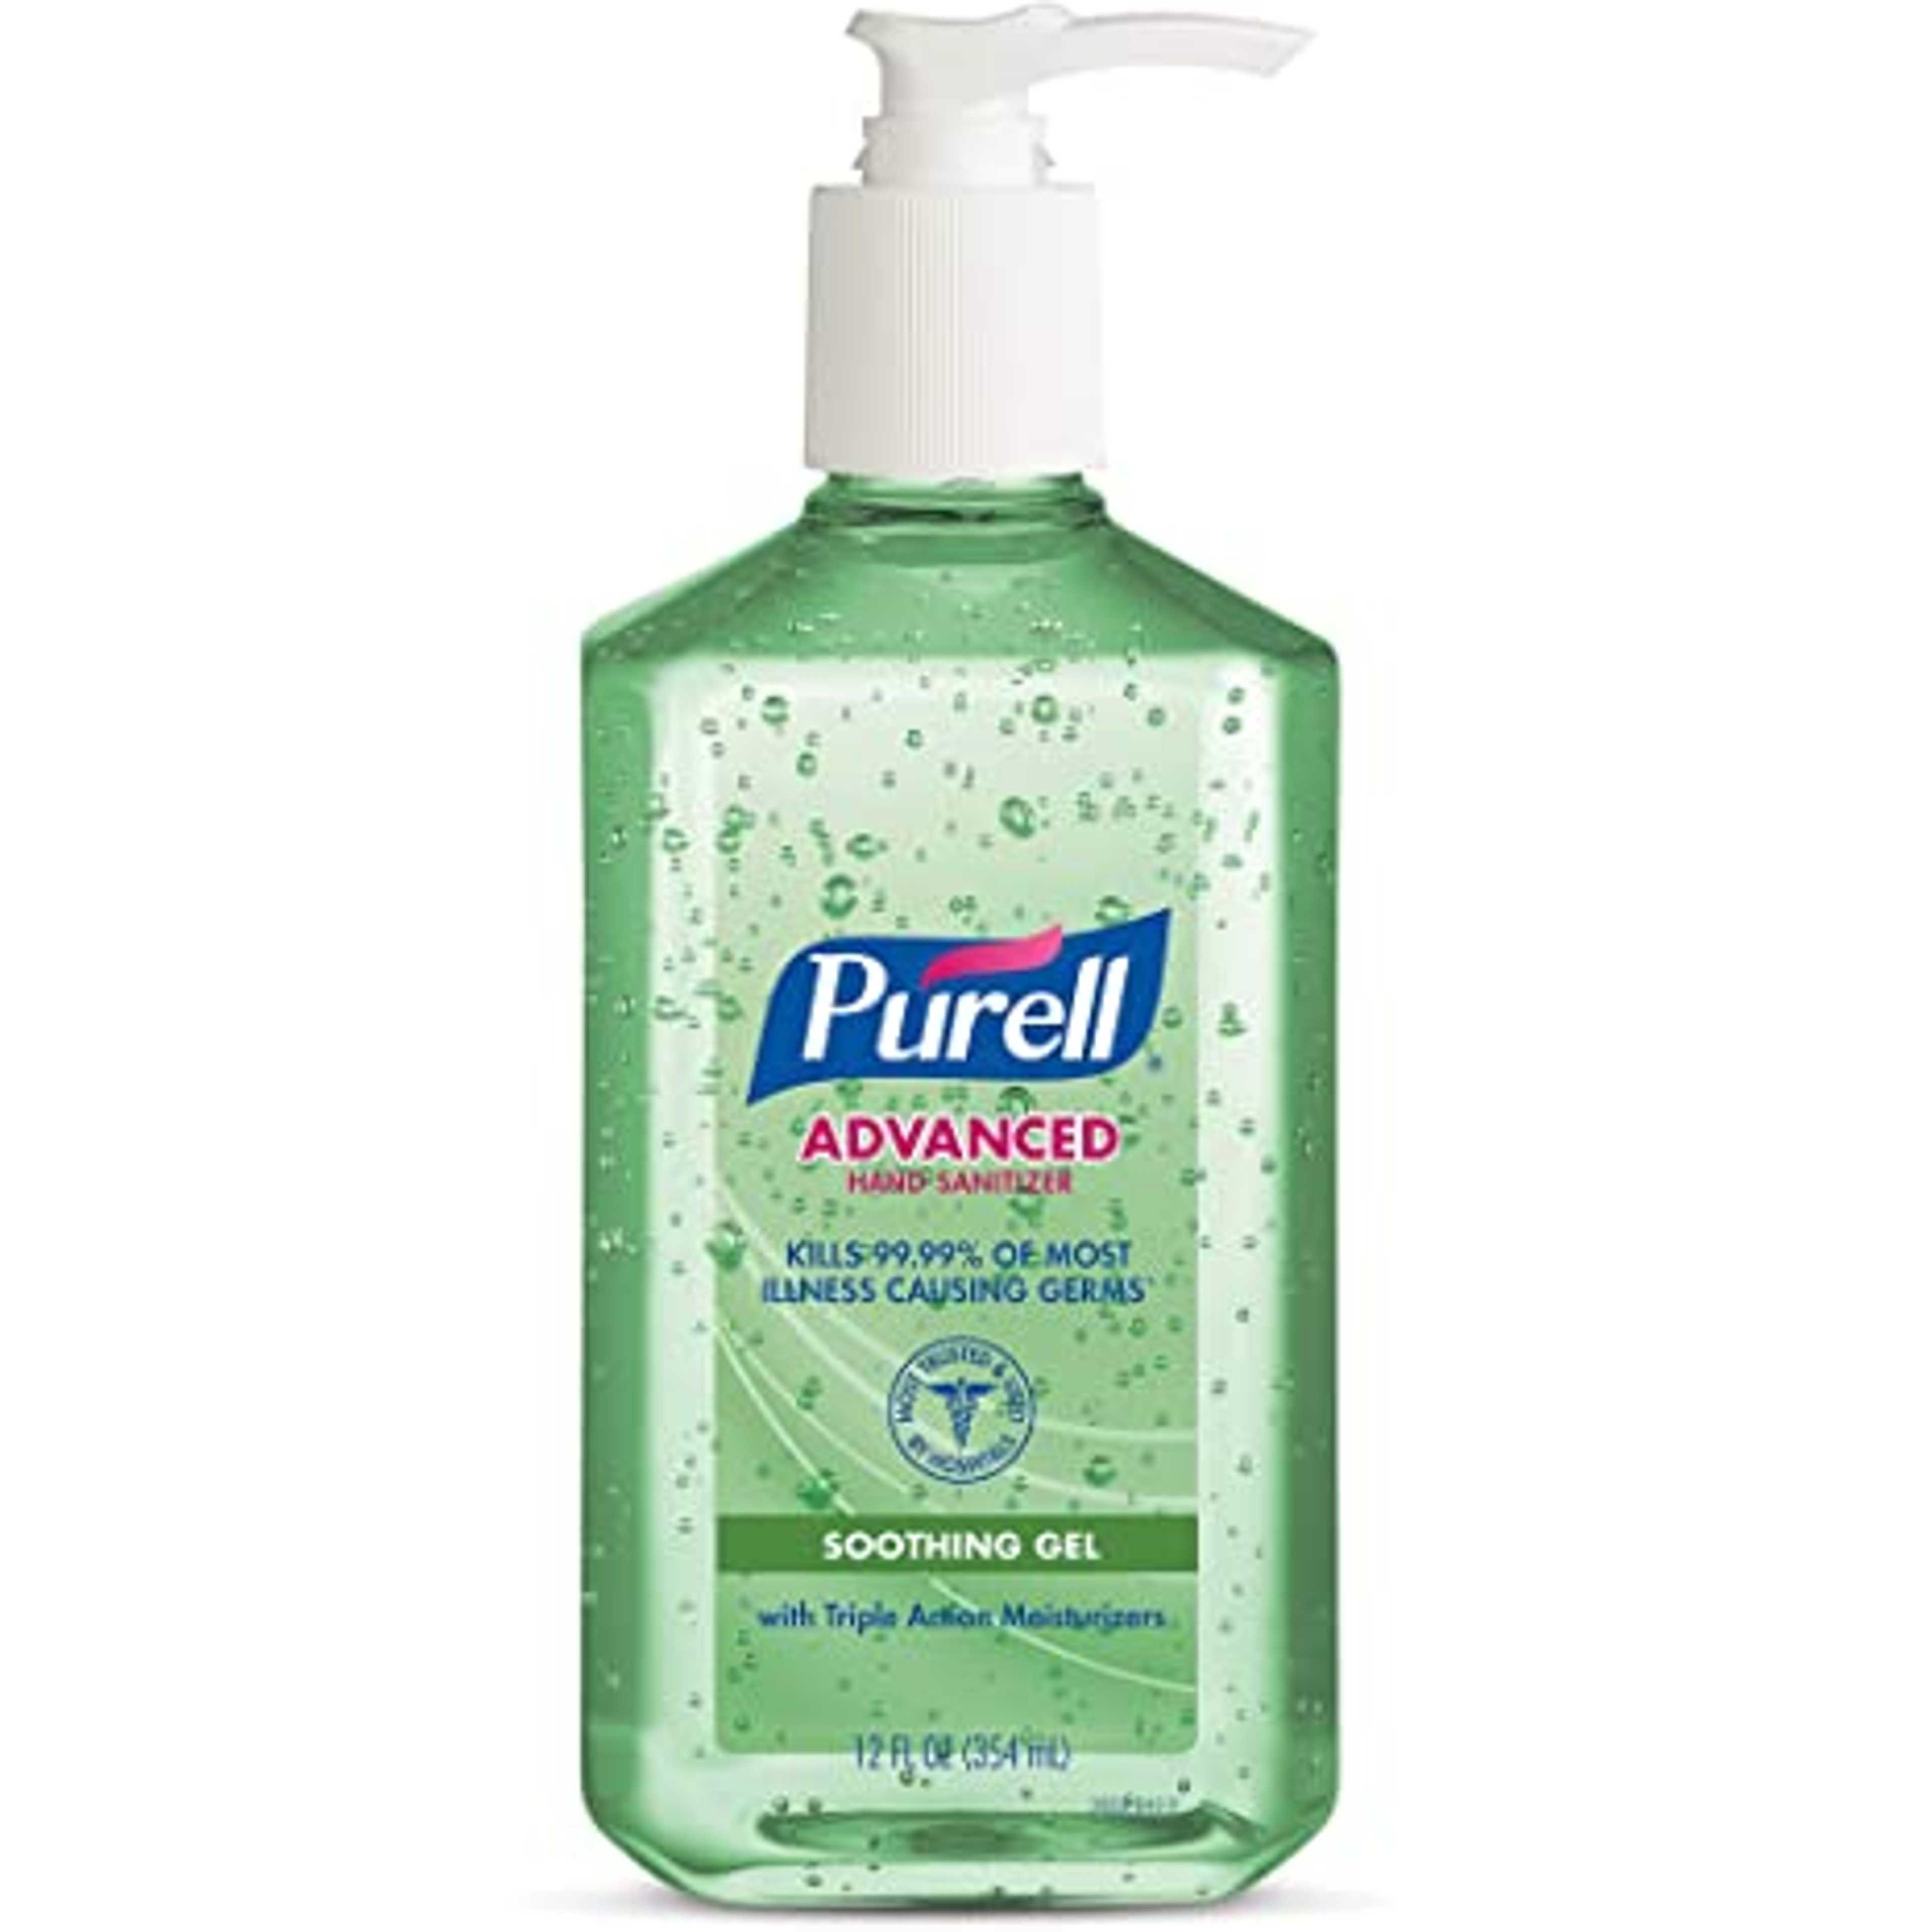 PURELL_ADVANCED HAND_SANITIZER SOOTHING GEL PUMP 236ML (Imported)